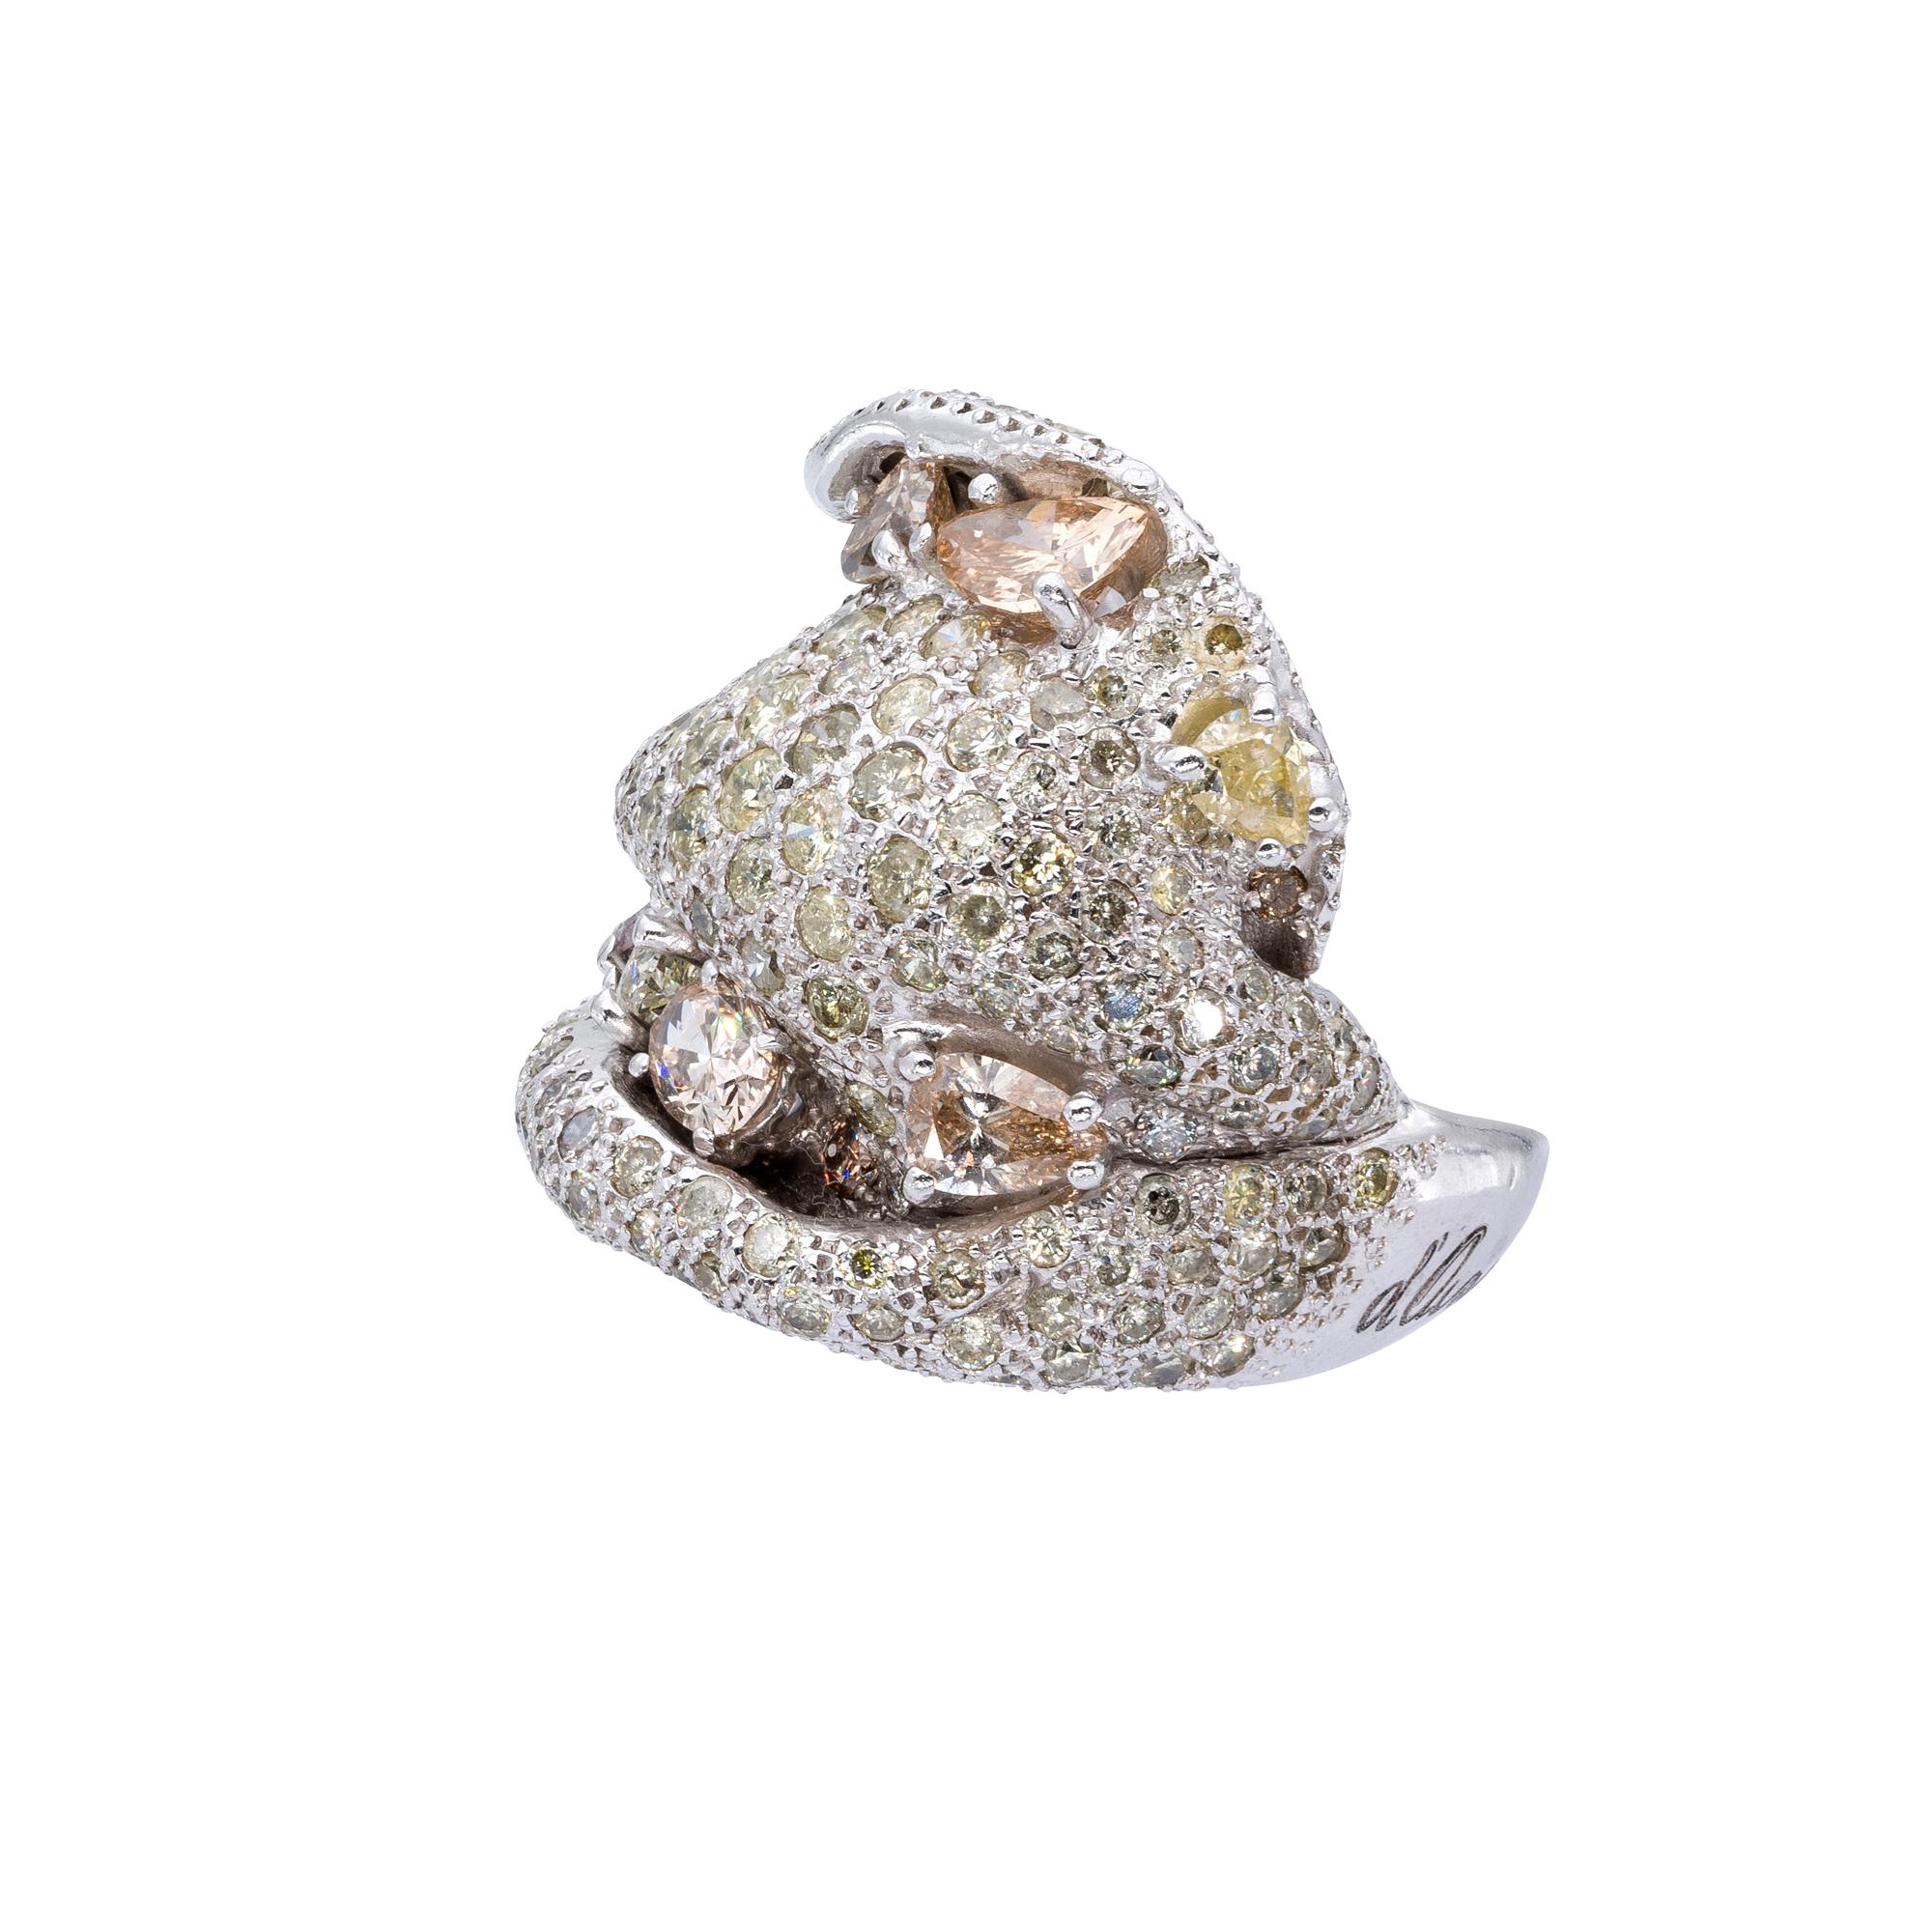 A Ring from d'Avossa Masterpiece Rings Collection in yellow 18 kt gold with a pavé of 0.55 cts of white diamonds and a central fancy natural oval shape diamond of 0.34 cts. 

Ref. Number ABT659

